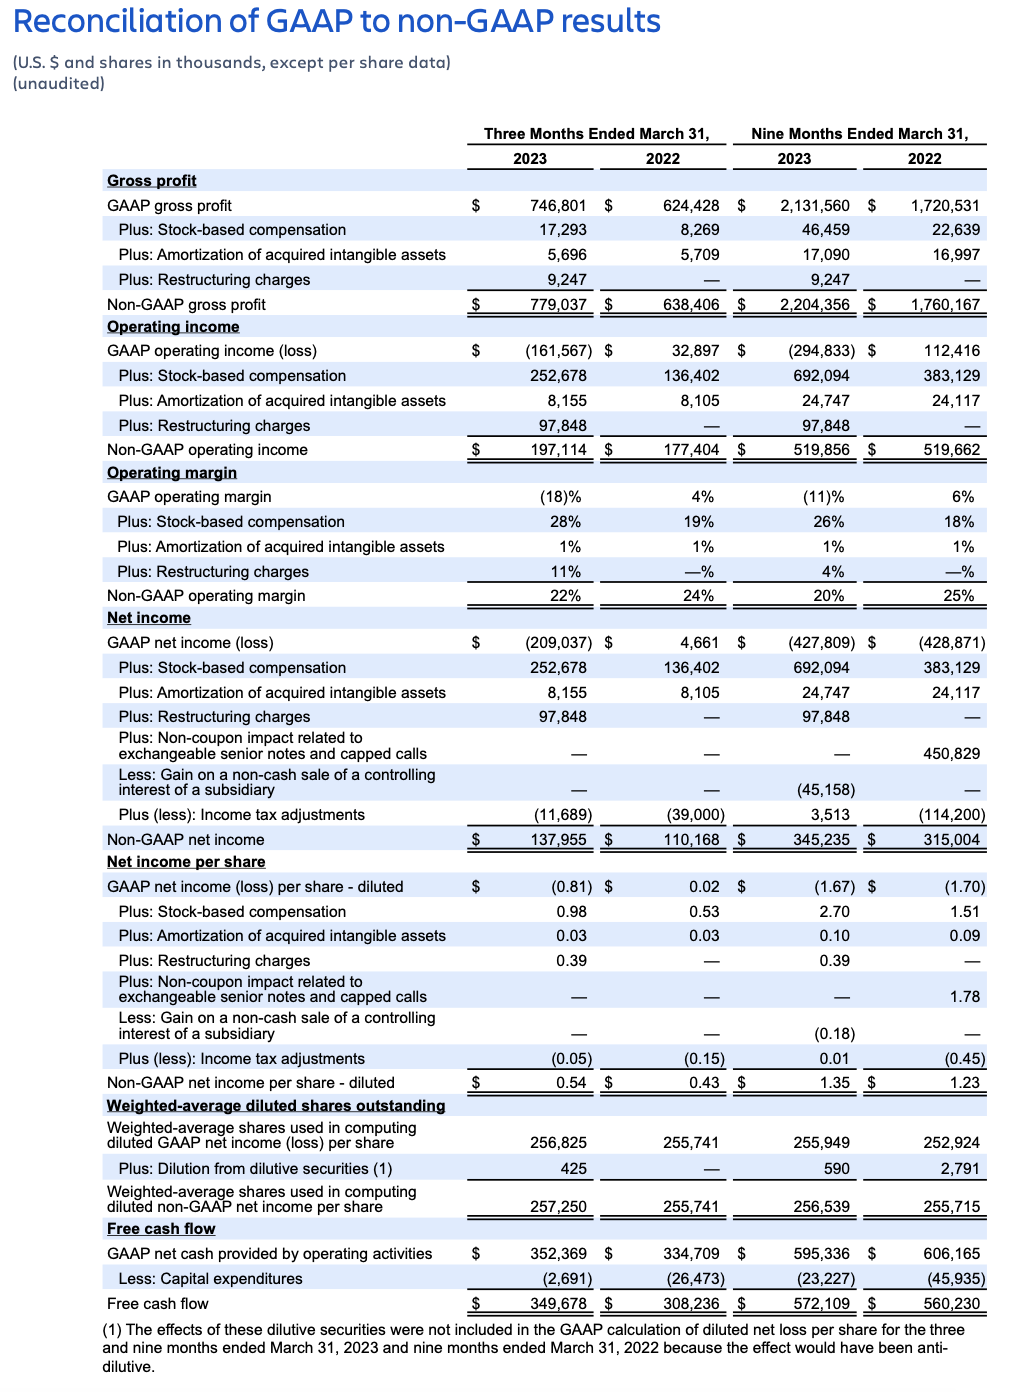 Atlassian earnings Q3 FY23 – reconciliation of GAAP to non-GAAP results